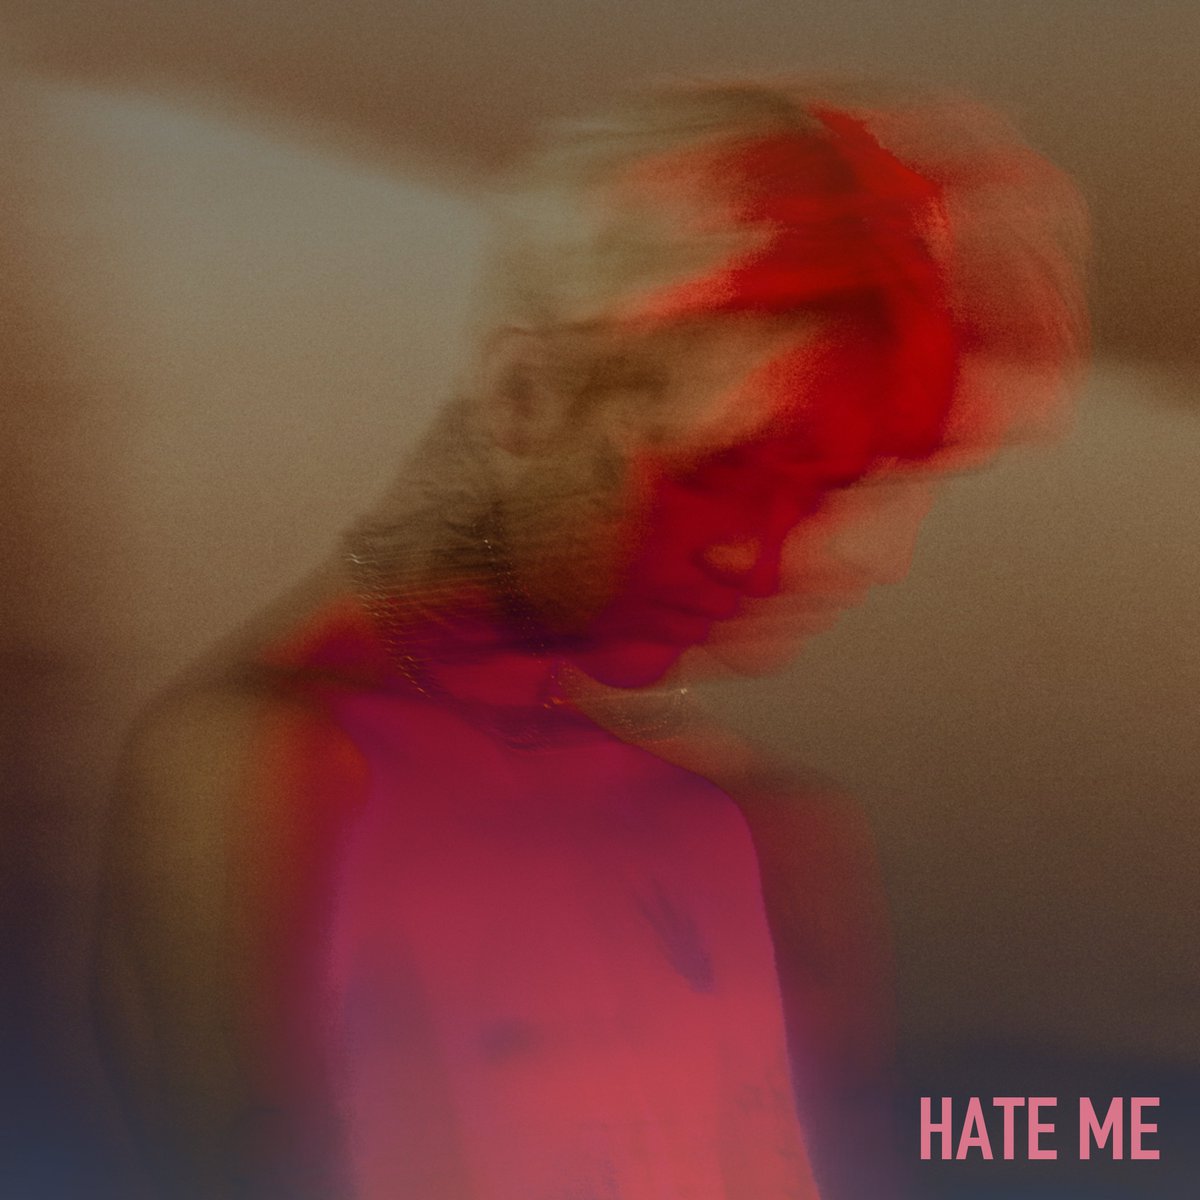 'HATE ME' is a three-song EP that Gus created with @smokeasac & @larsstalfors in late 2016. It includes the original versions of “Spotlight” and “Hate Me”, along with a previously unreleased track titled “Looking For You”. 'HATE ME' is now available lilpeep.ffm.to/hateme